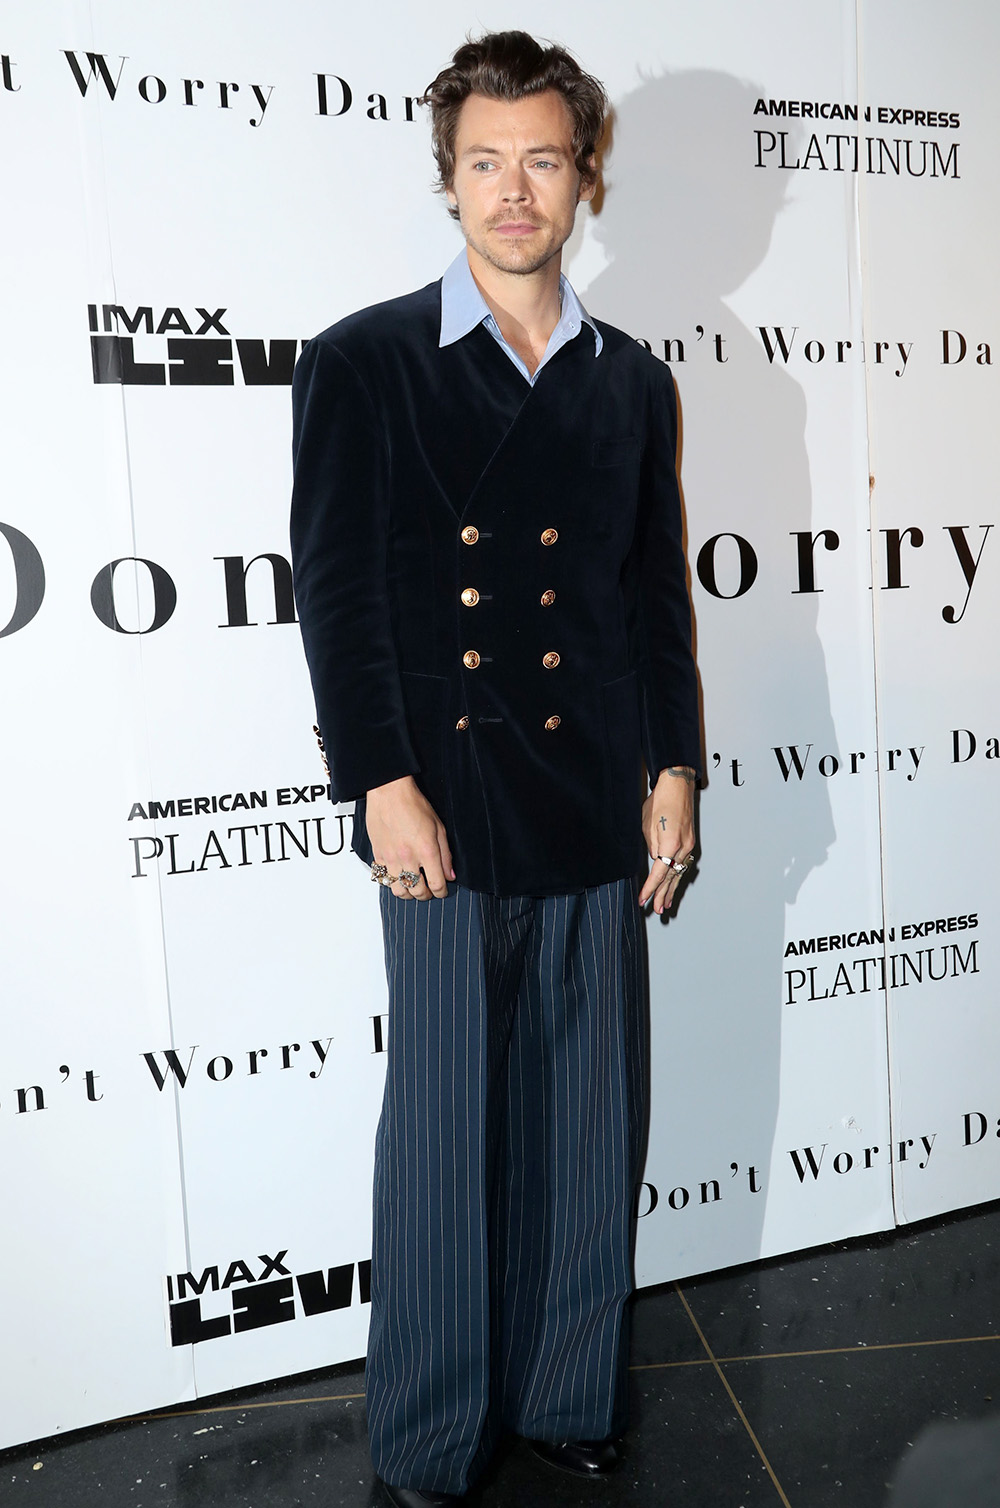 Harry Styles' Don't Worry Darling Movie Premiere, New York, USA - September 19, 2022